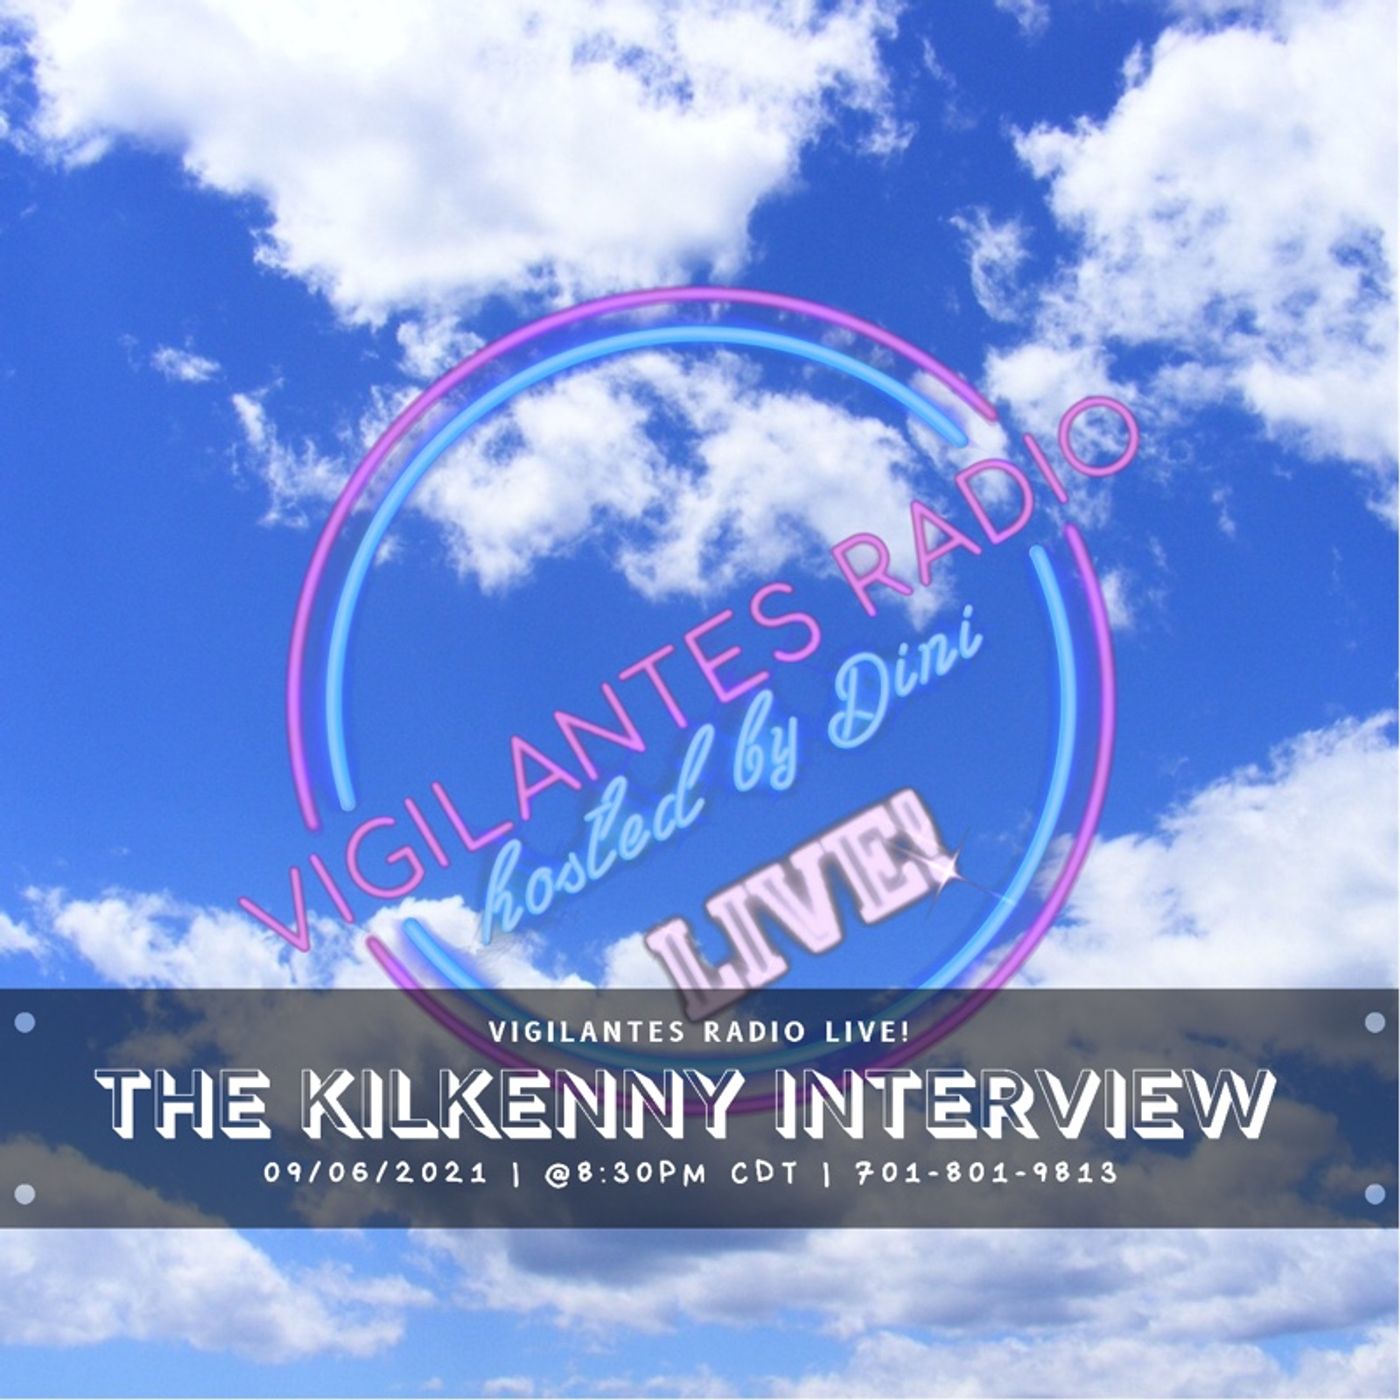 The KILKENNY Interview. Image